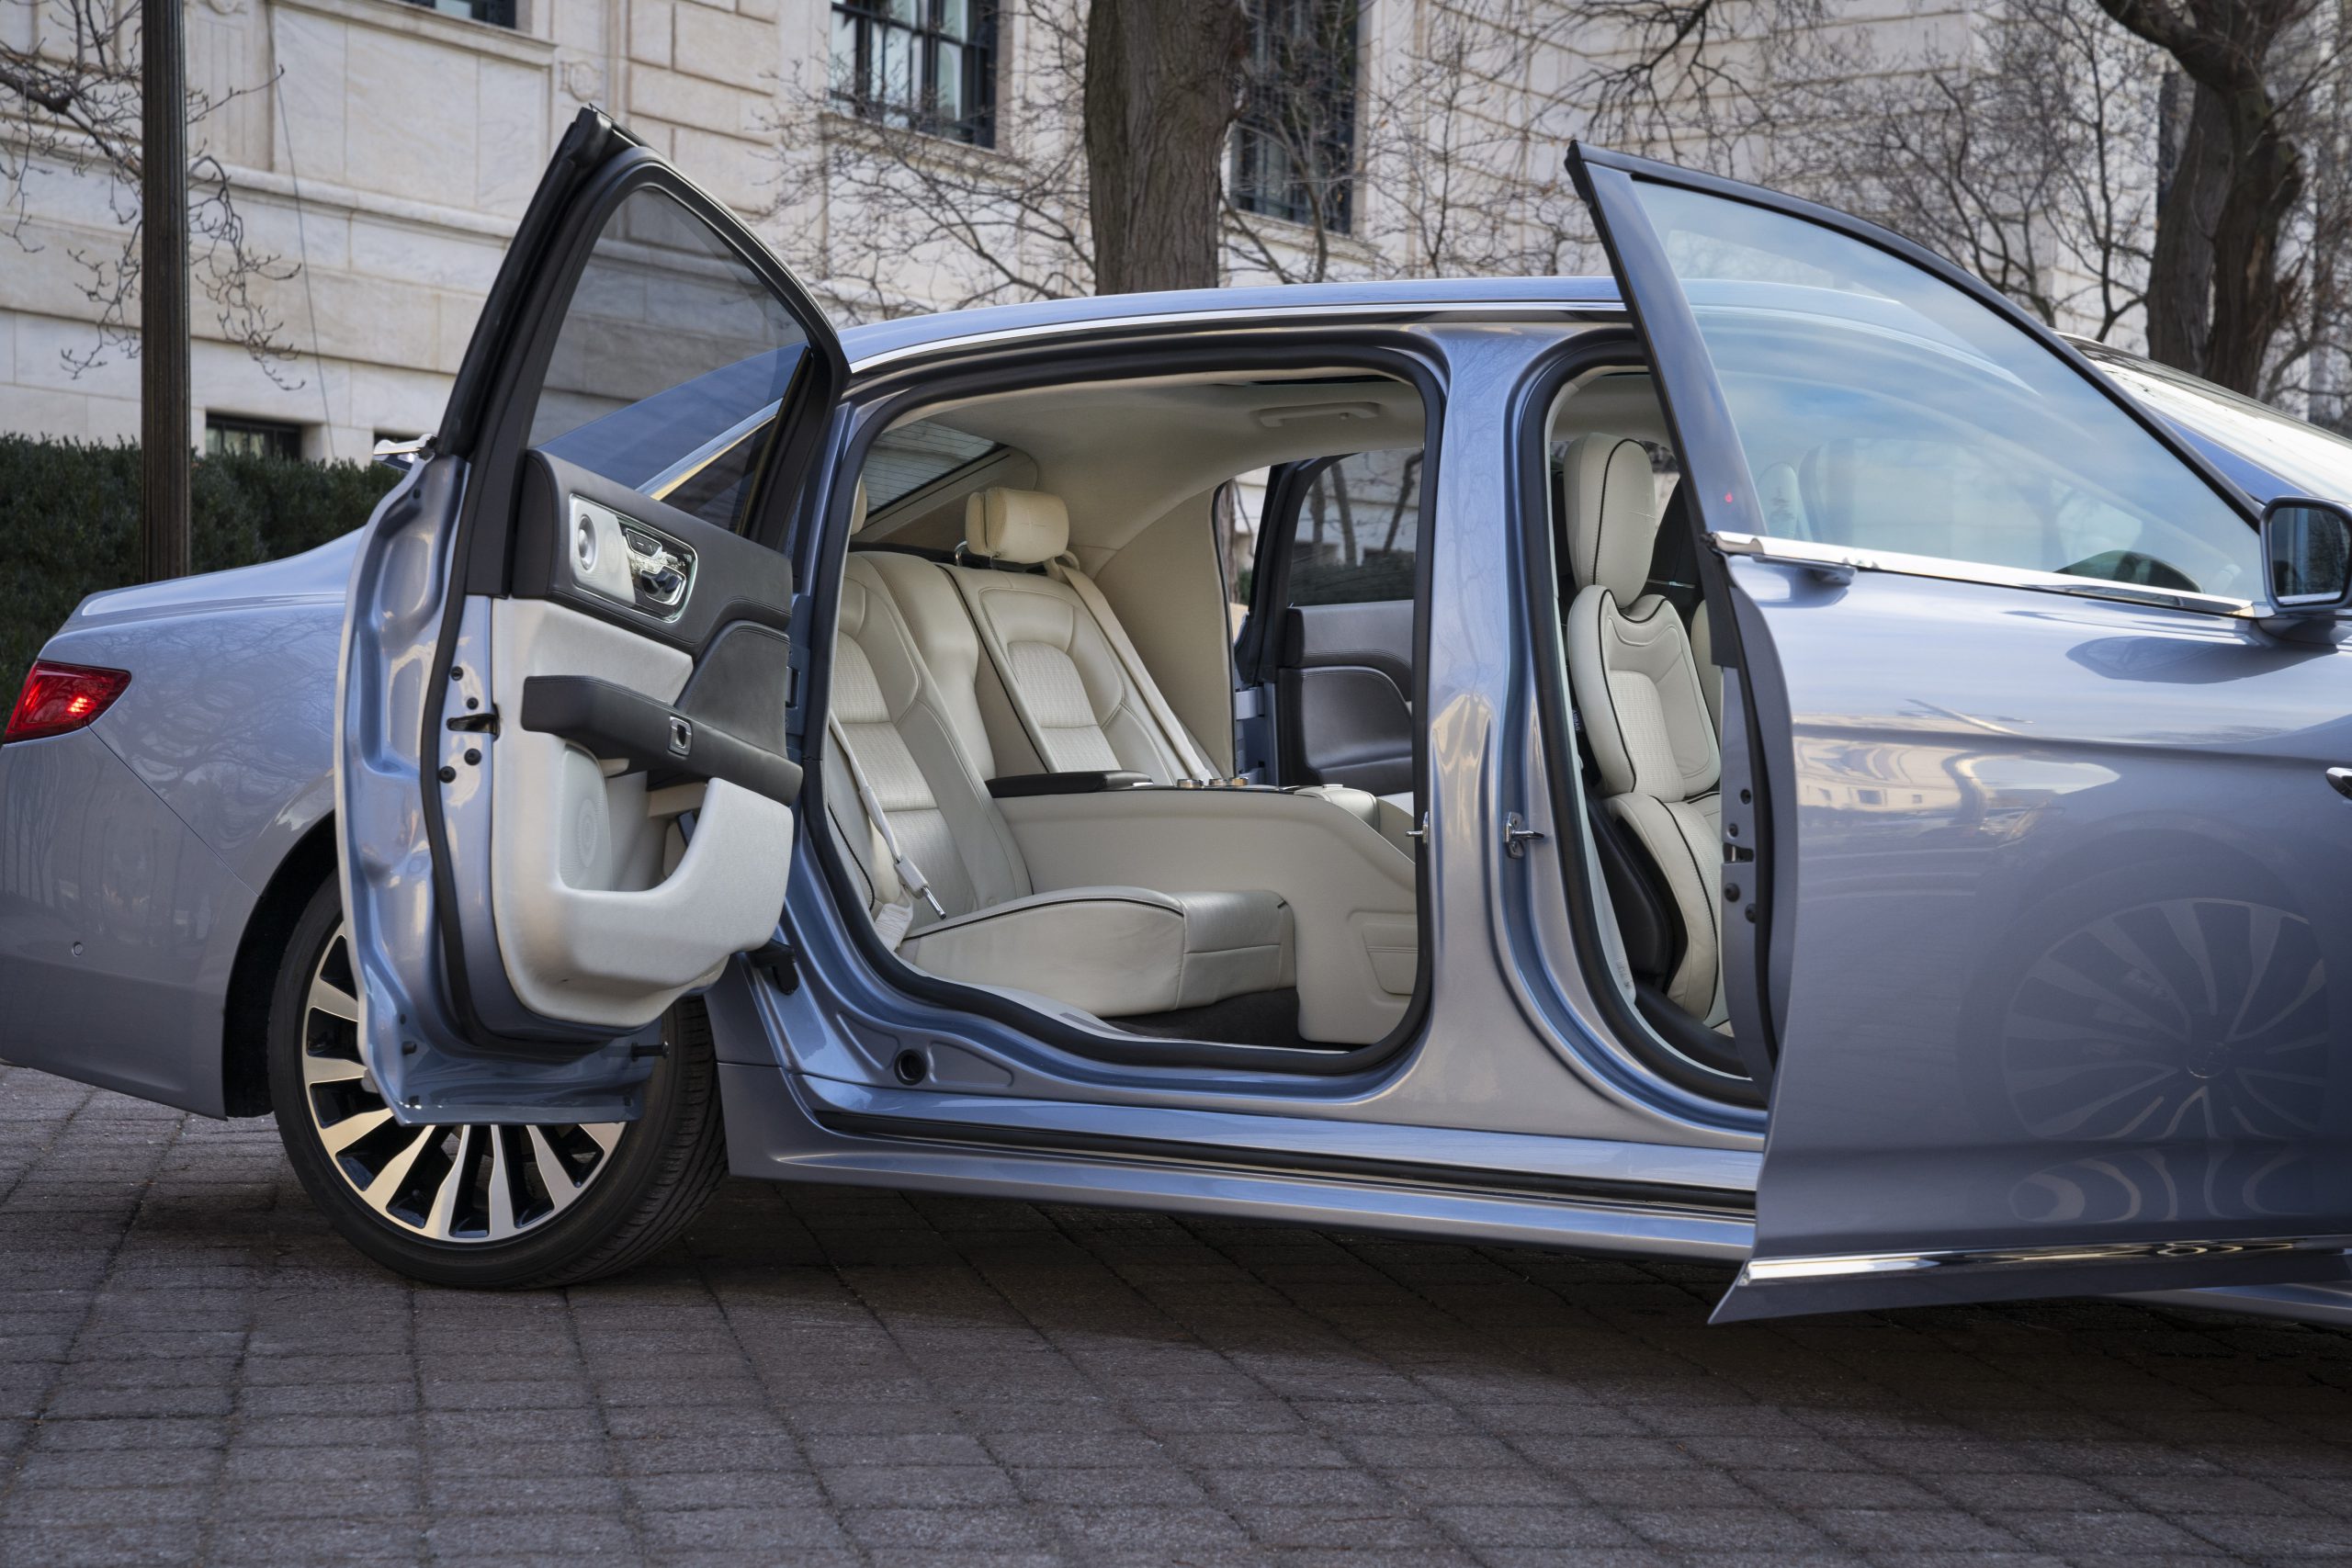 2019 Lincoln Continental Coach Edition with its suicide doors open.